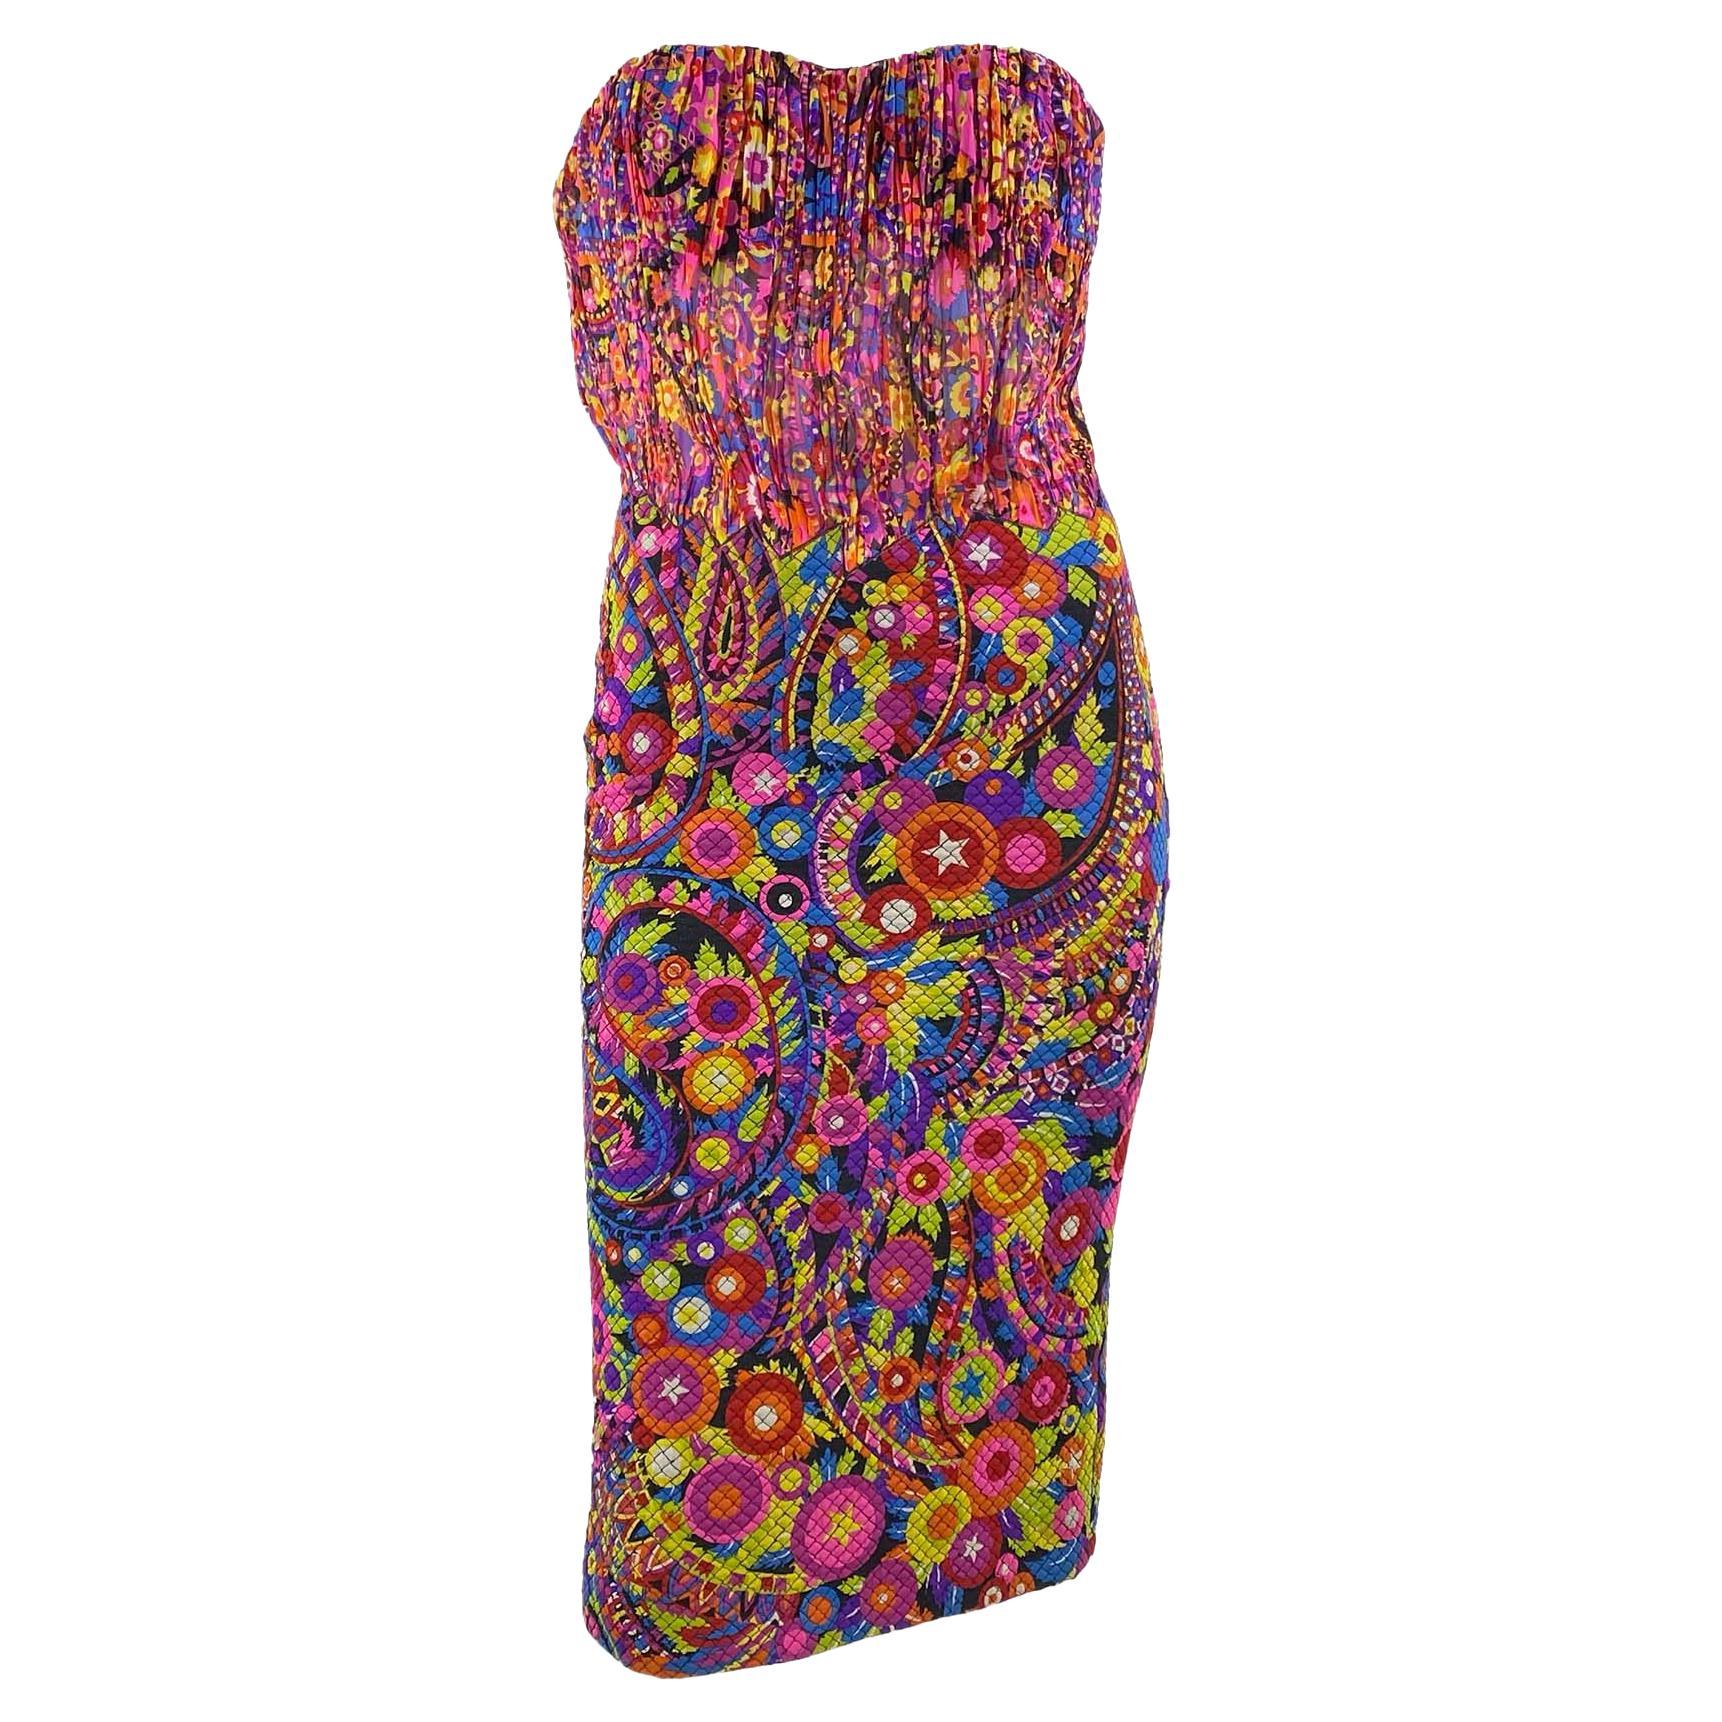 F/W 2002 Gianni Versace by Donatella Psychedelic Print Sheer Strapless Dress